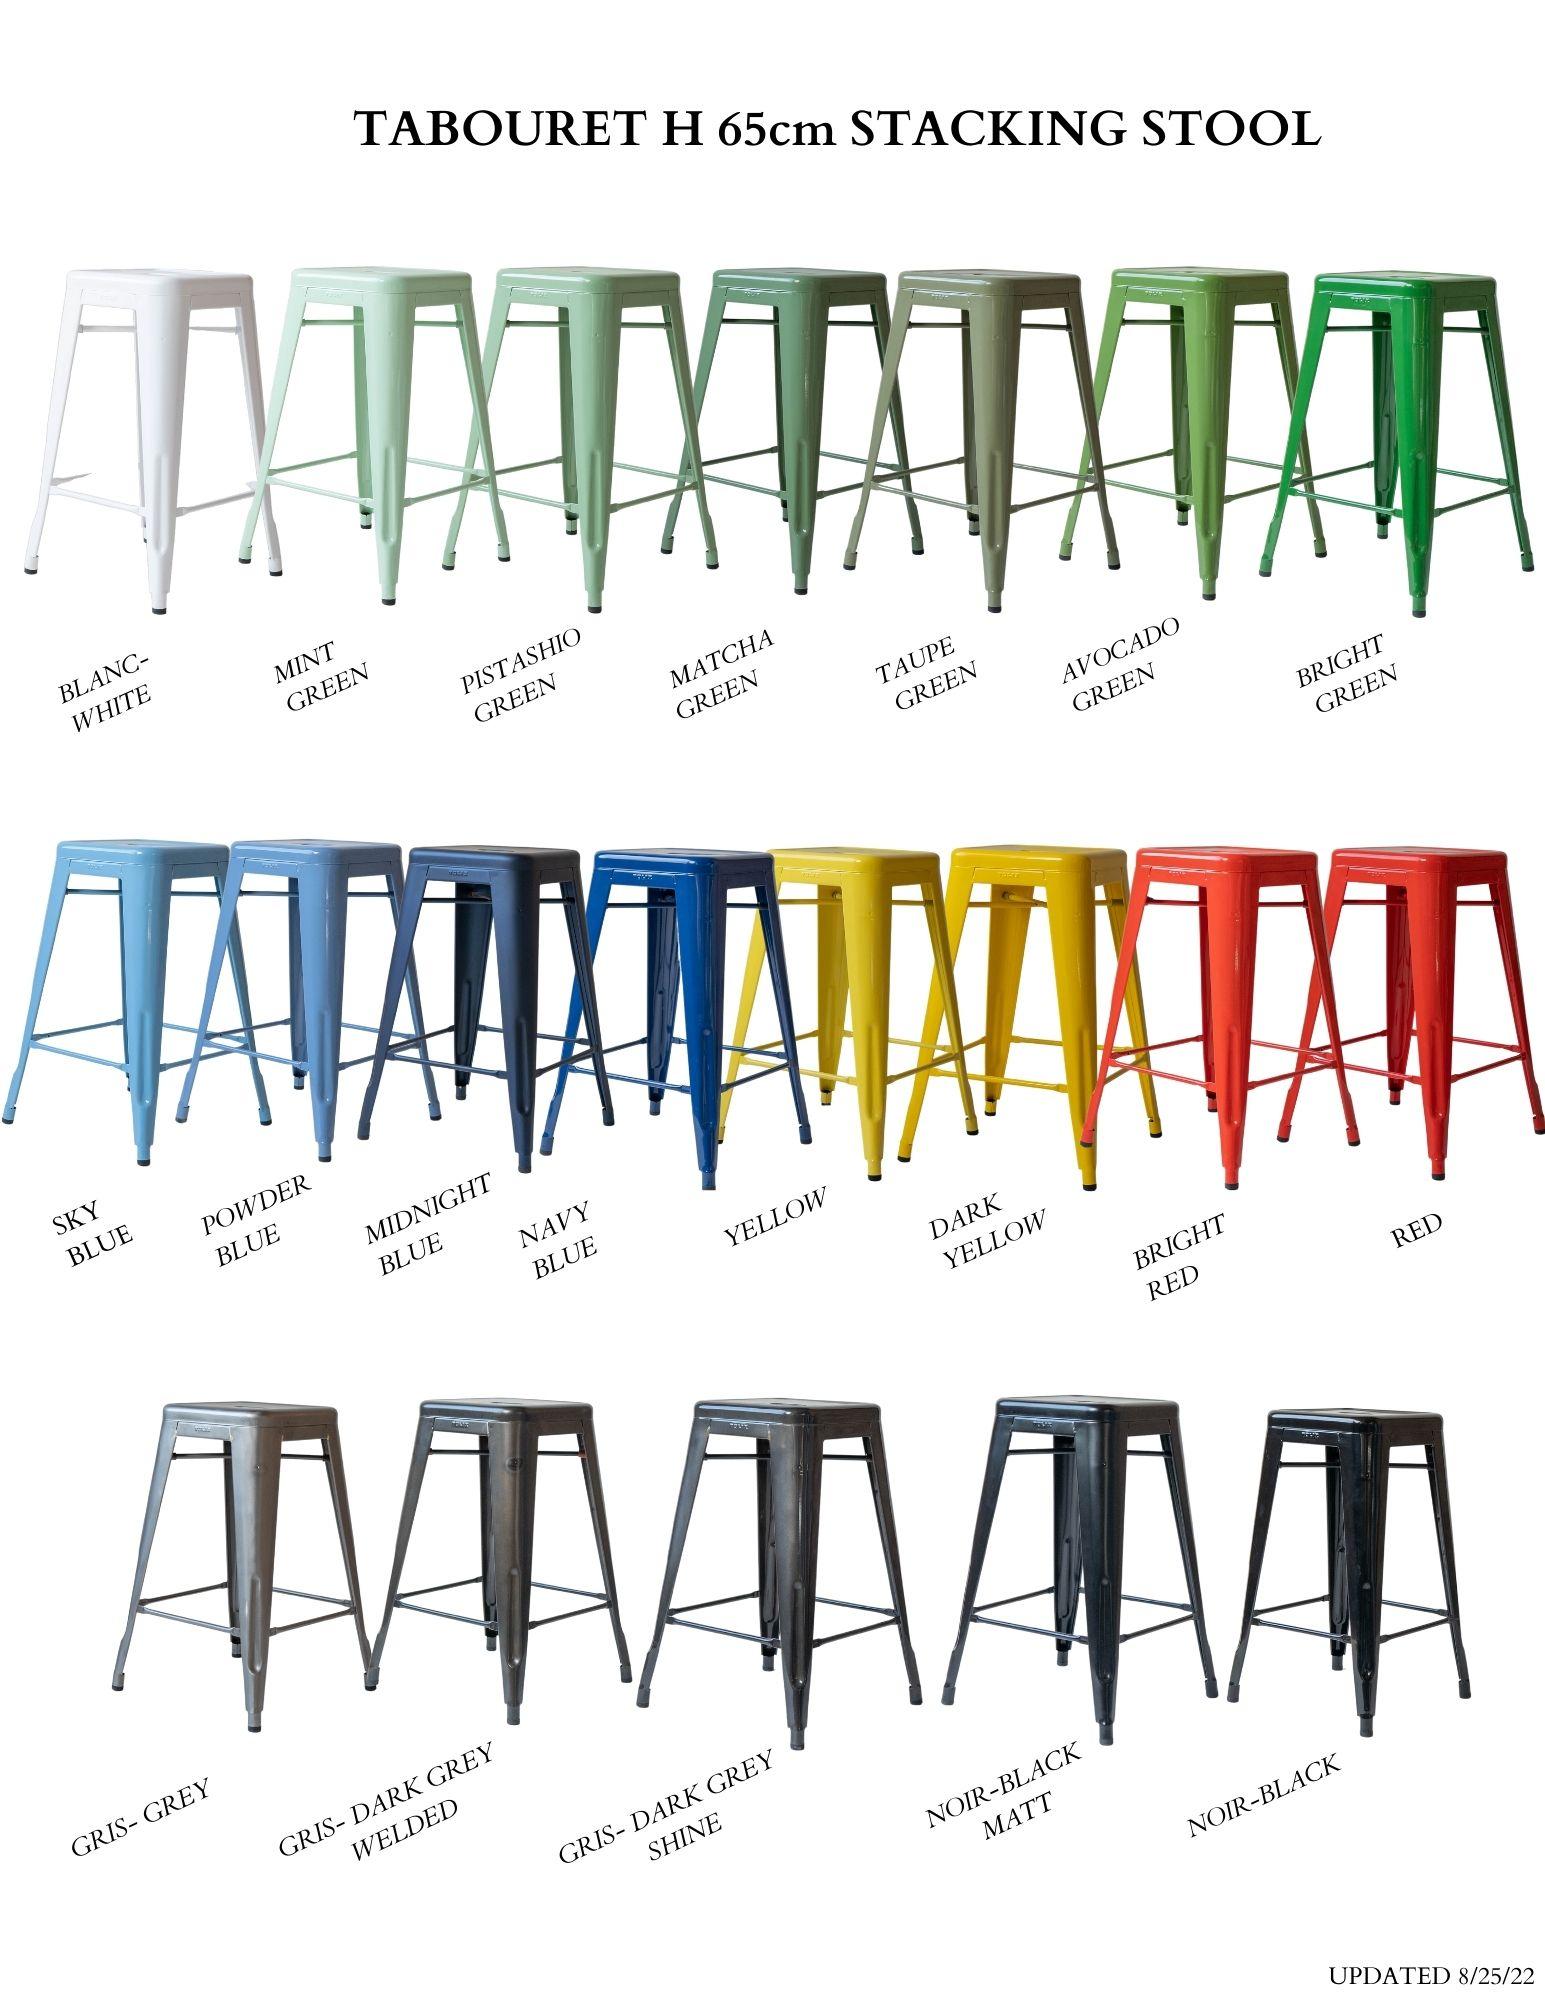 Genuine Tolix Vintage Stacking Stools Dining Table Height Hundred's Available 6